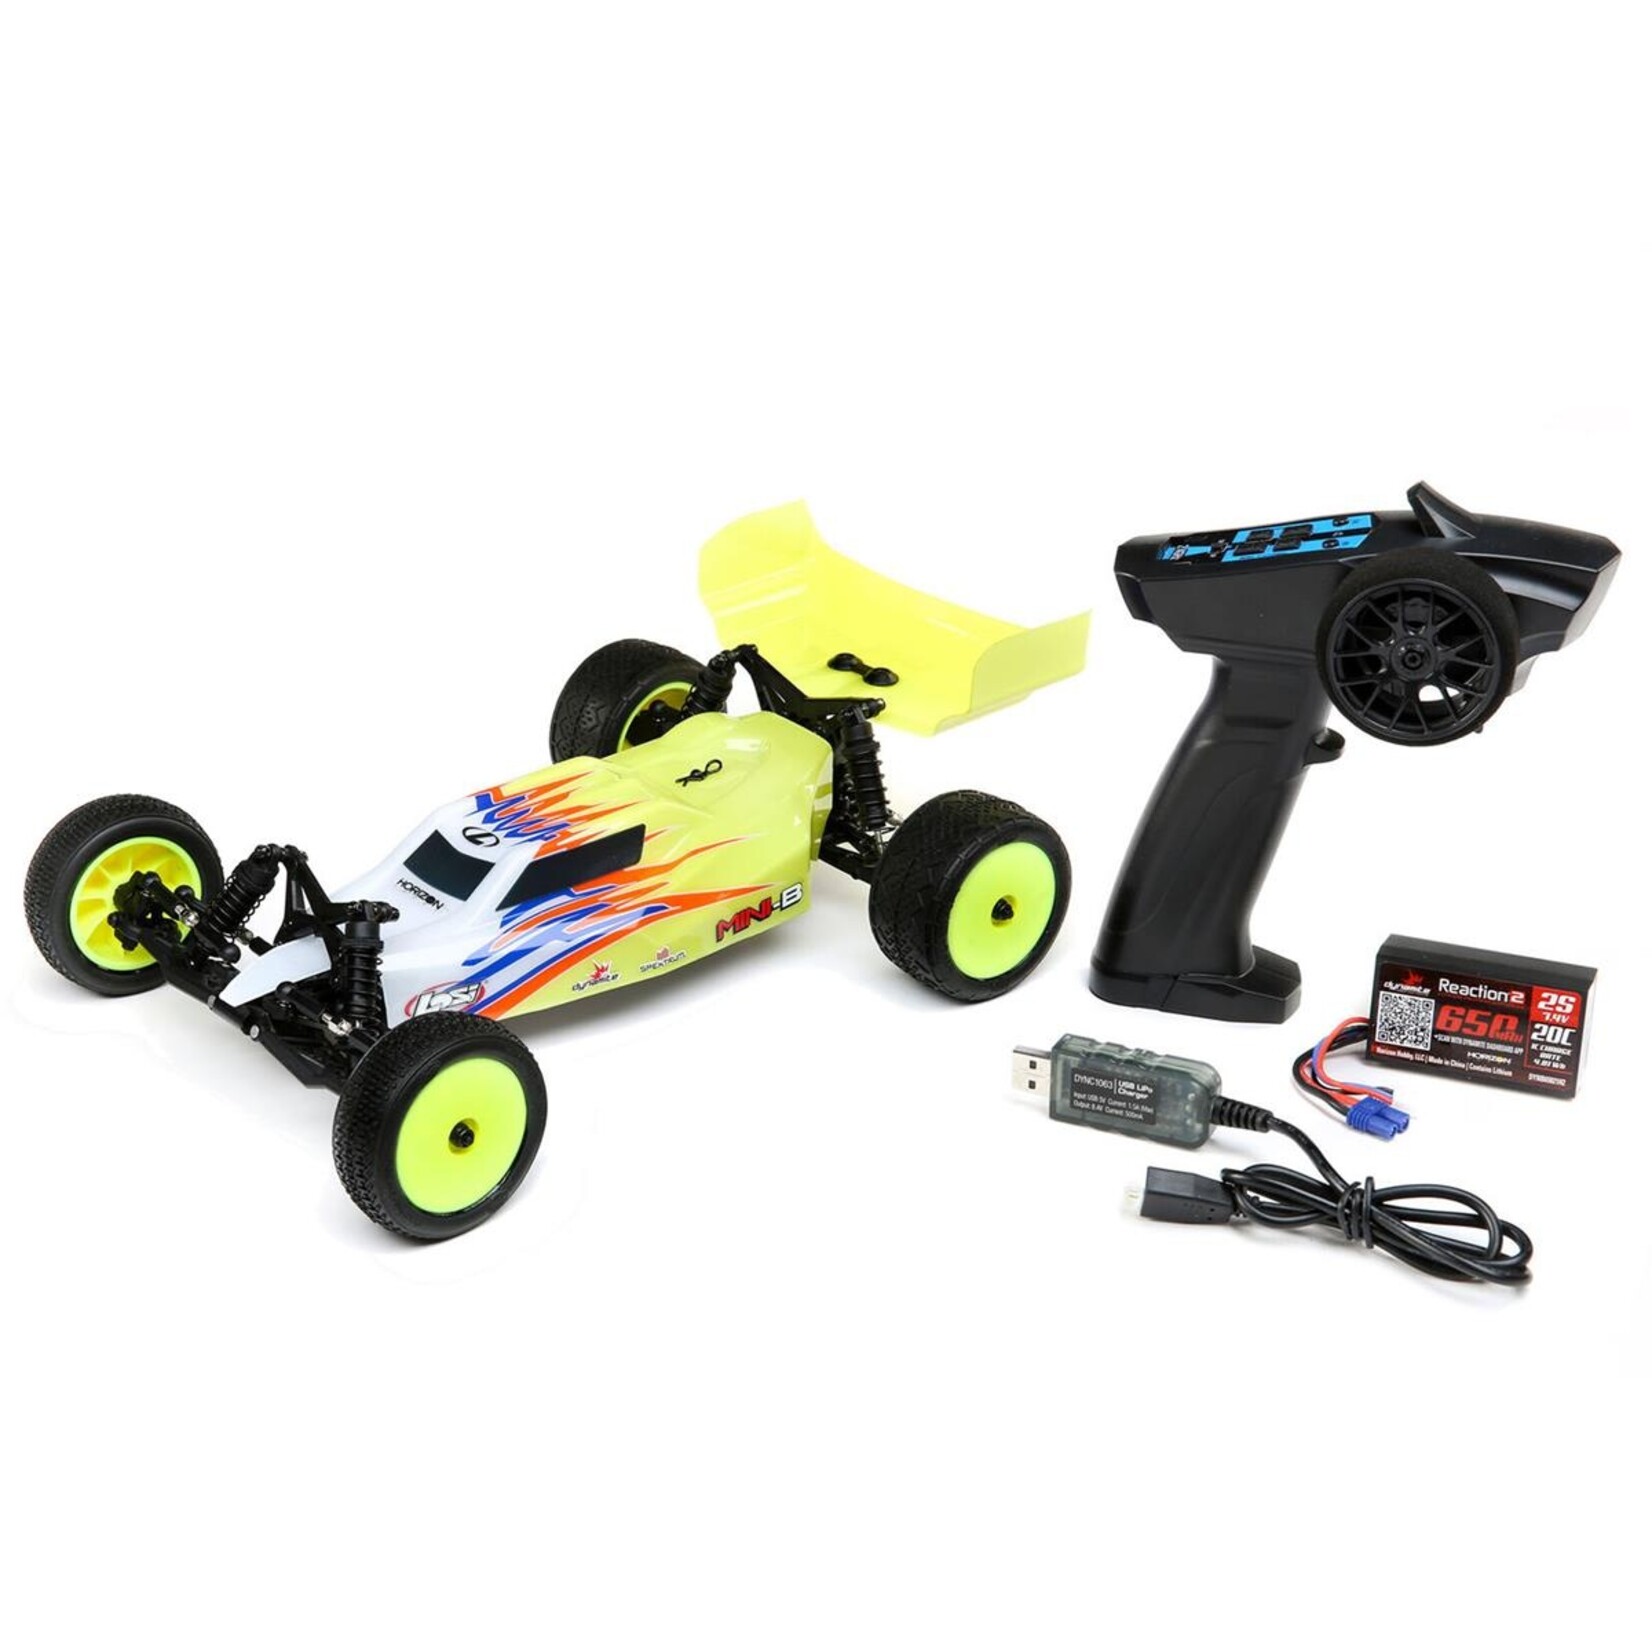 Losi Losi Mini-B 1/16 RTR 2WD Buggy (Yellow) w/2.4GHz Radio, Battery & Charger #LOS01016T3